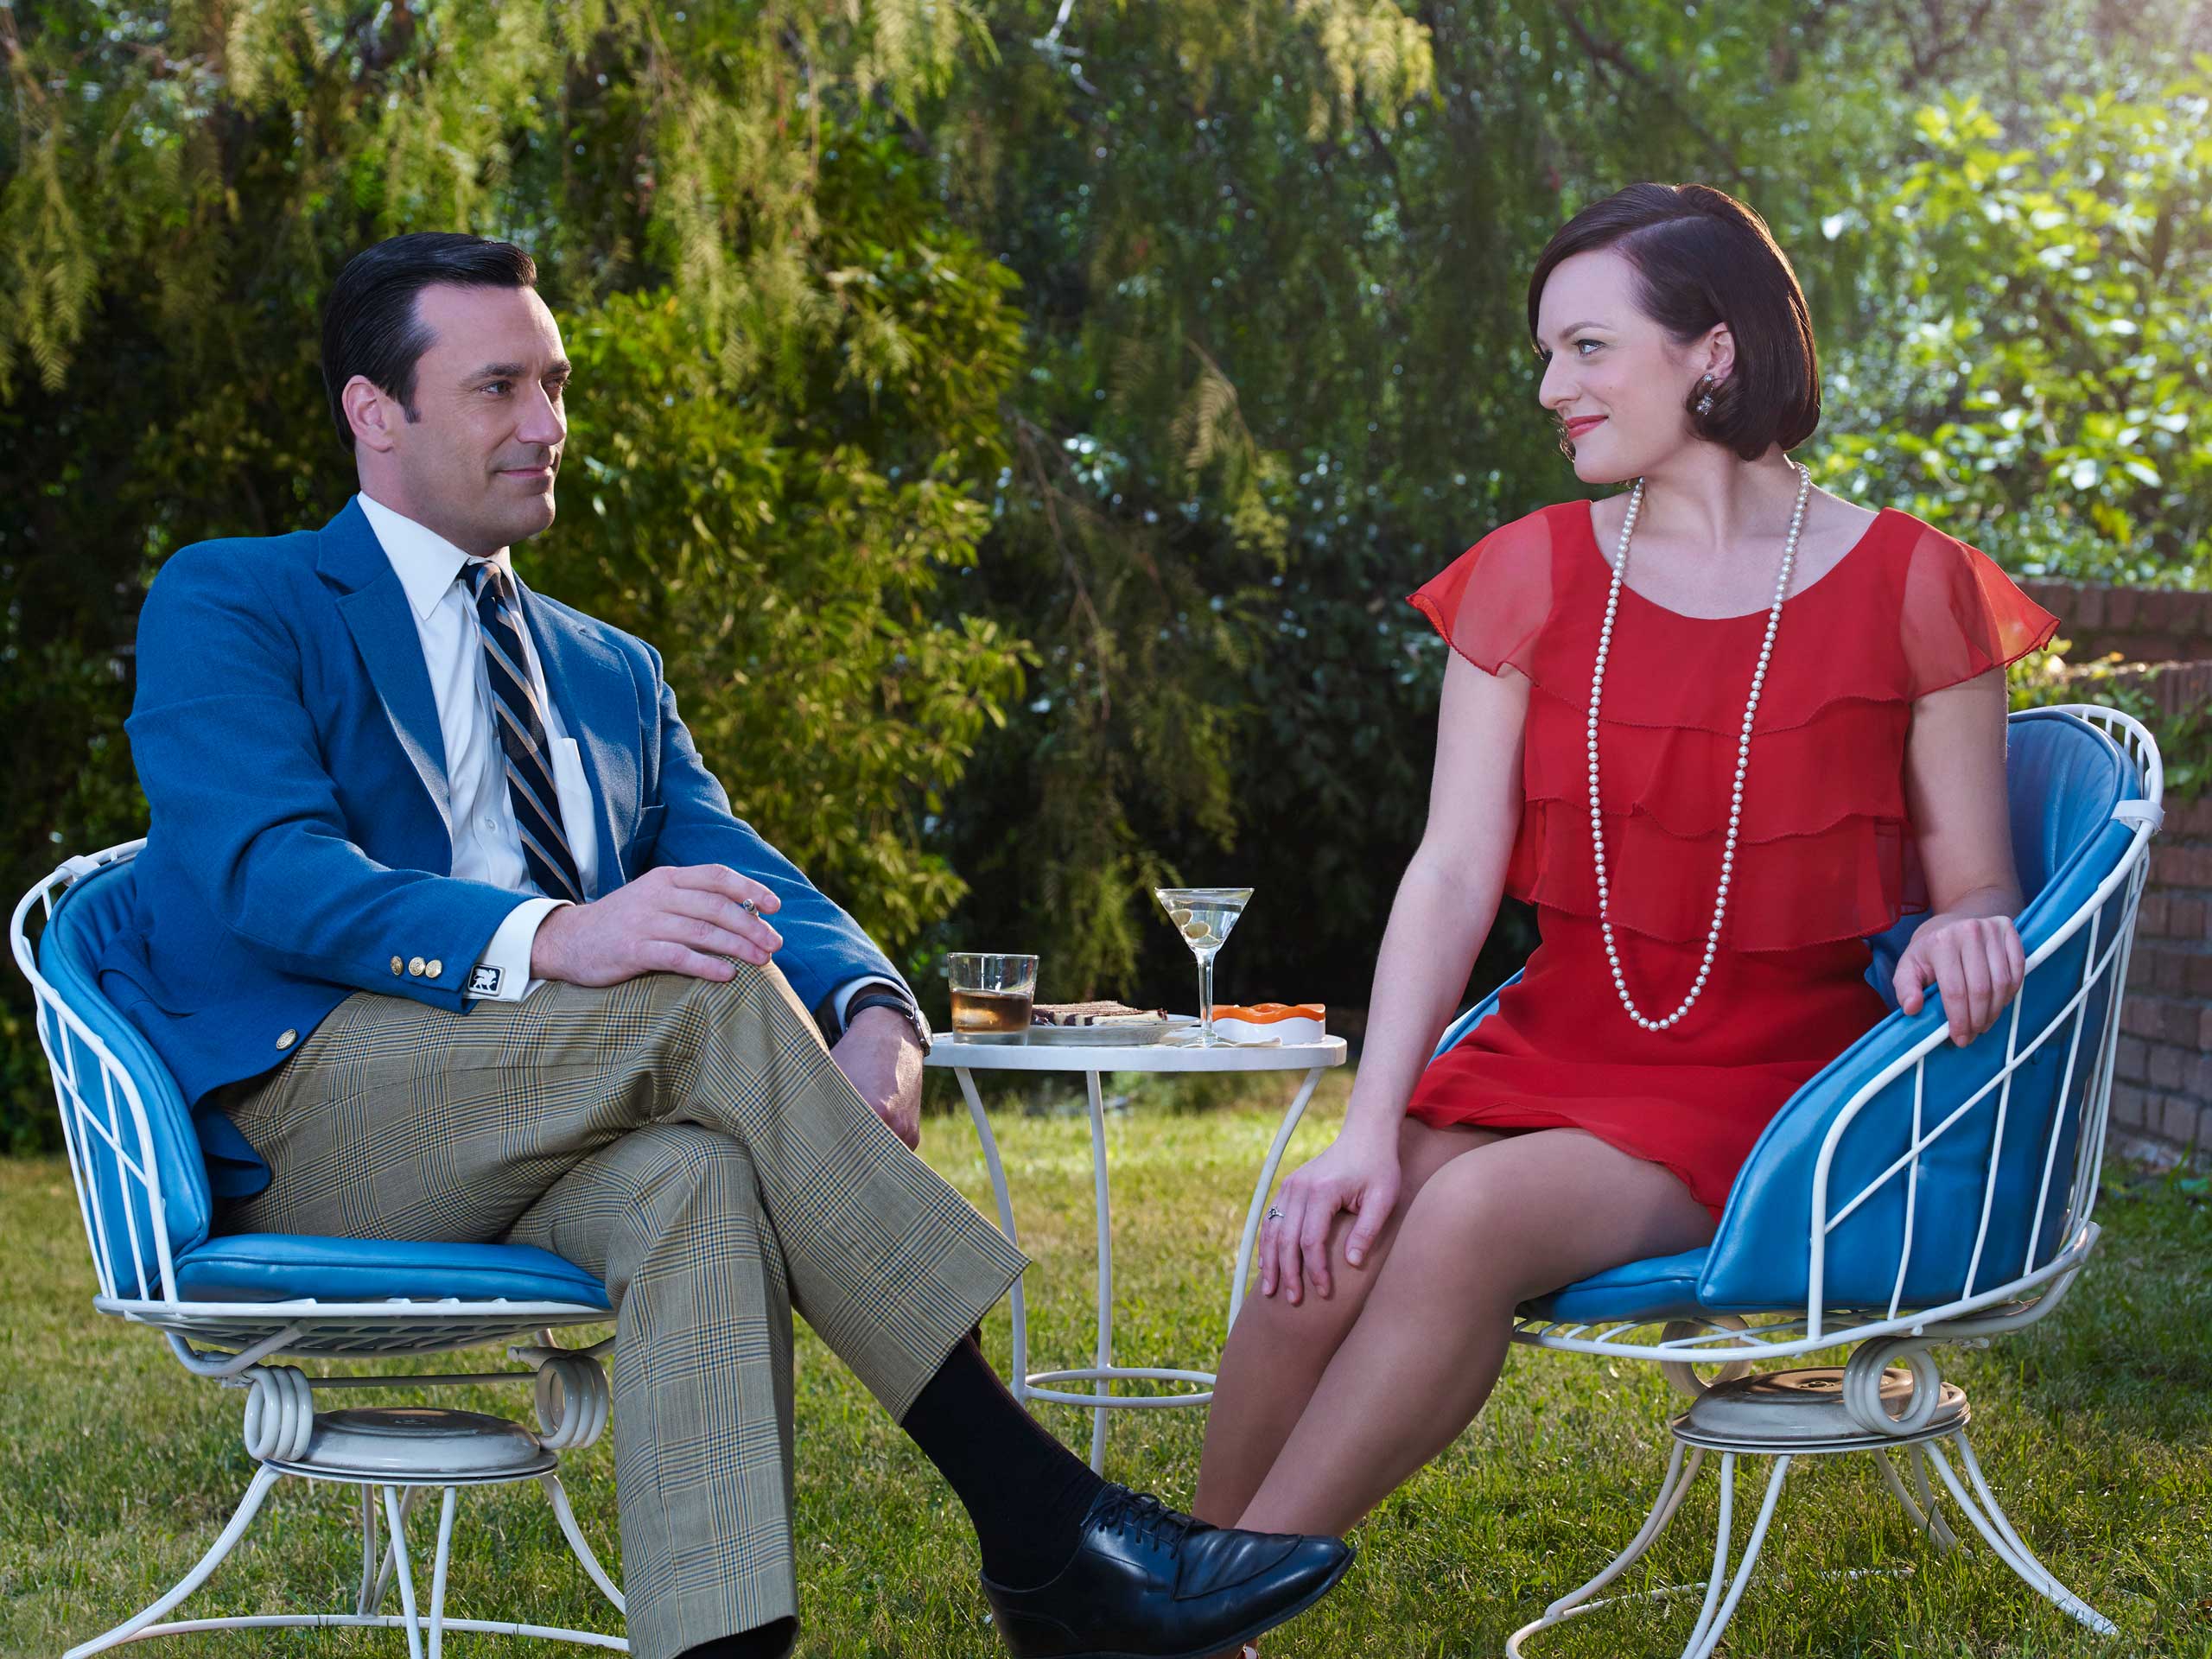 From Left: Jon Hamm as Don Draper and Elisabeth Moss as Peggy Olson in Mad Men season 7B.